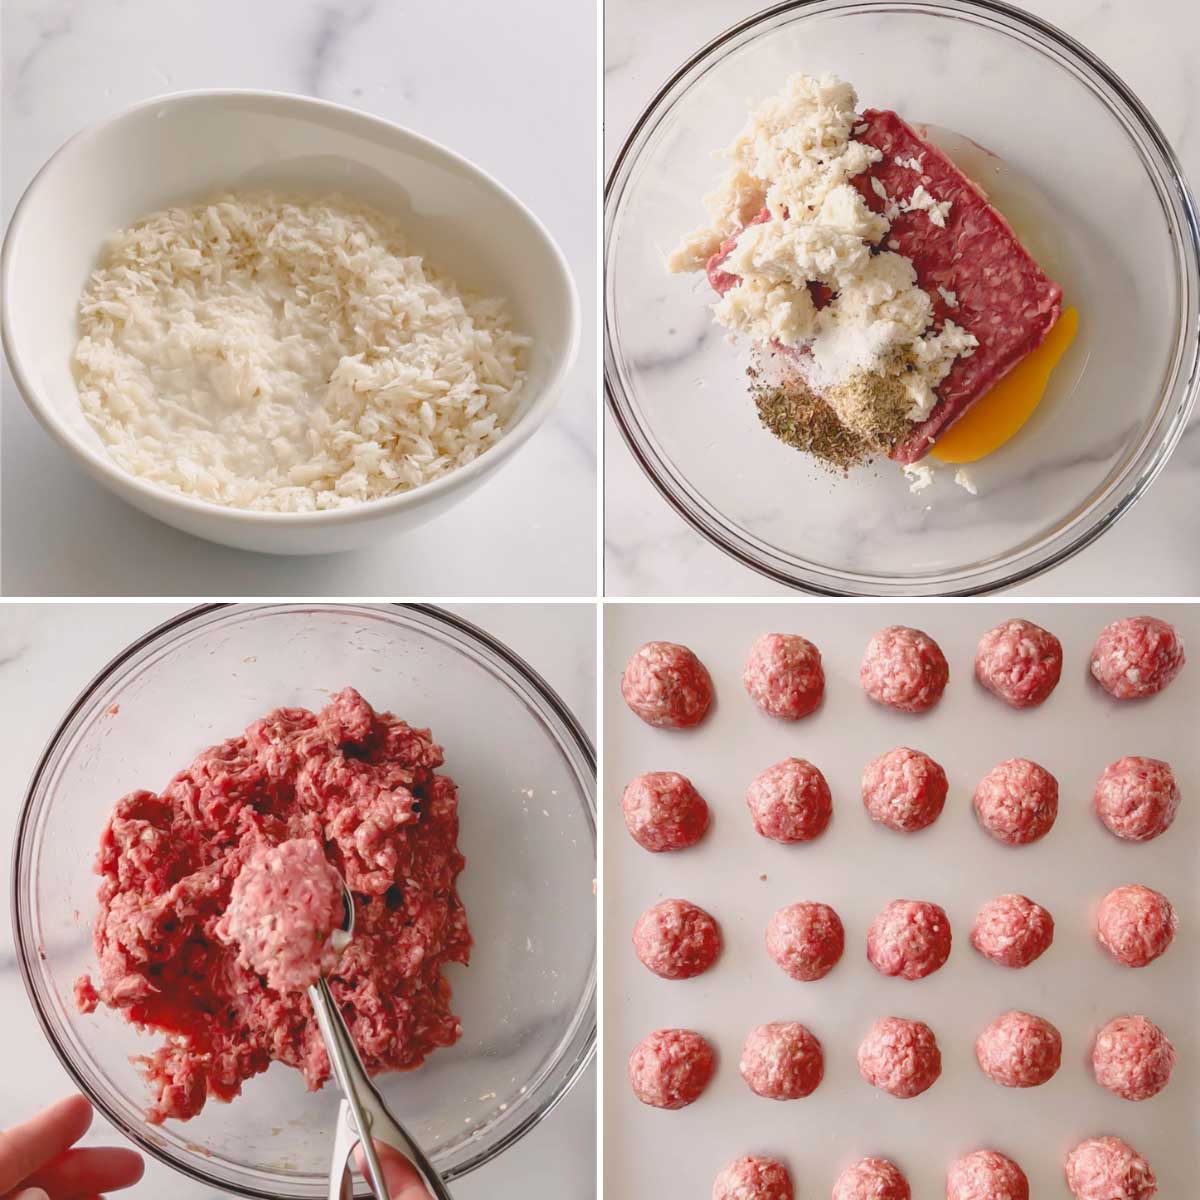 Four images showing the process of combining meatball ingredients and shaping the mixture into balls.